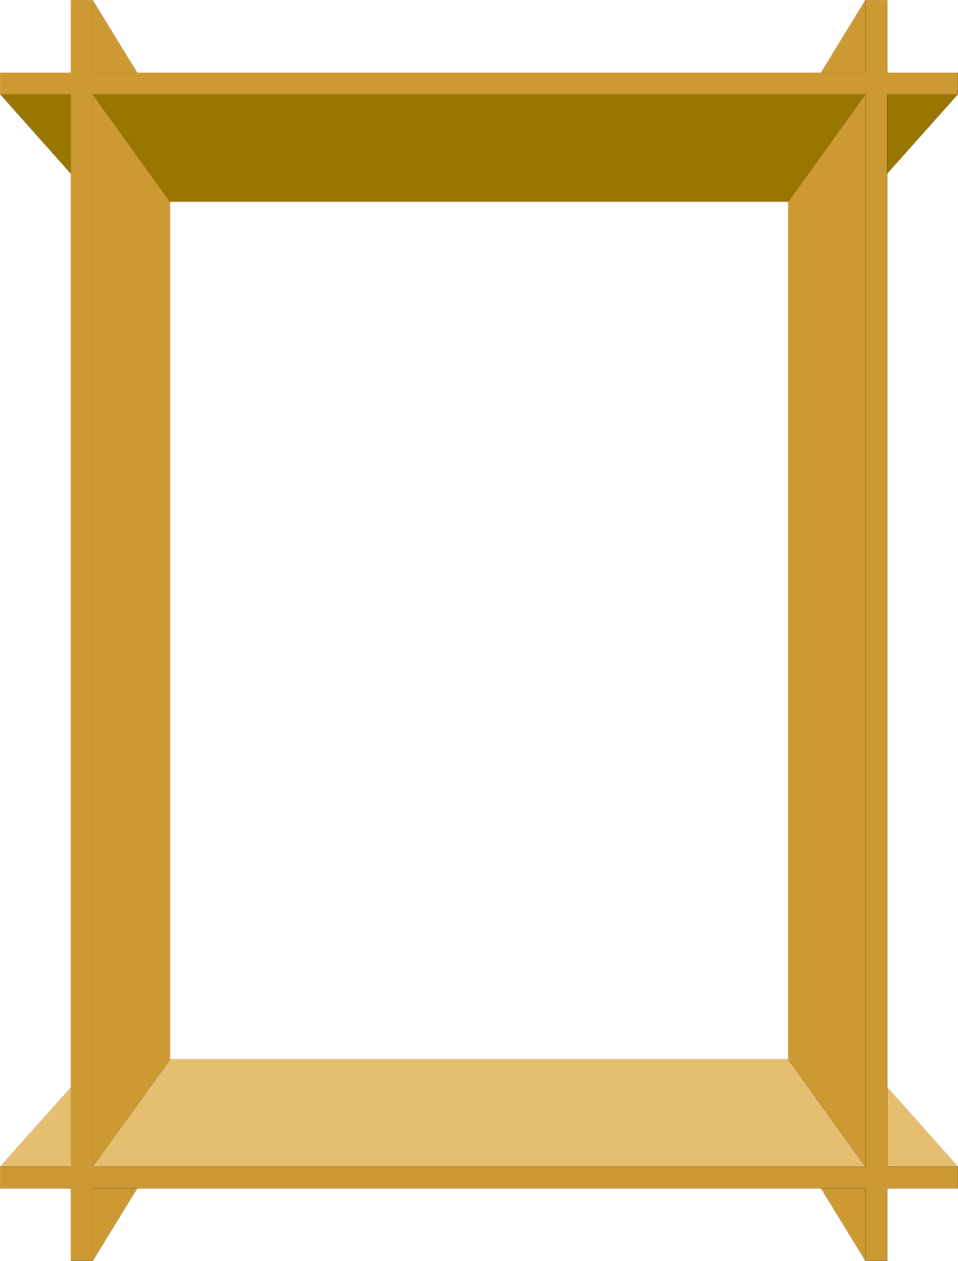 Picture Frame   Free Stock Photo   Illustration Of An Empty 3d Wooden